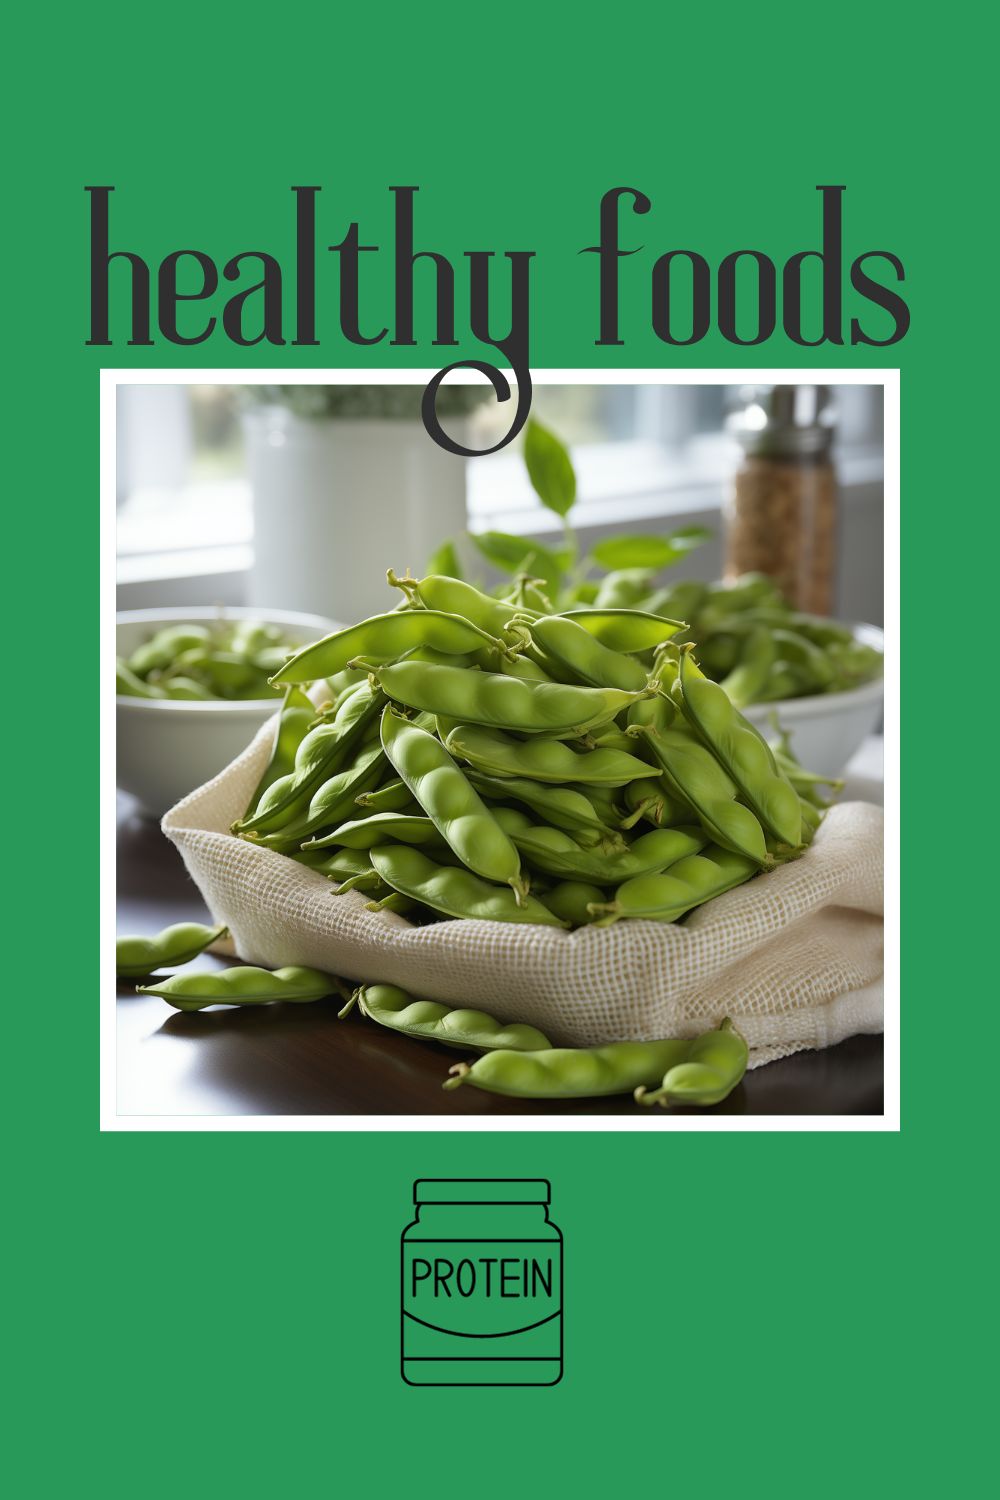 protein-rich edamame beans in a sack on the counter 